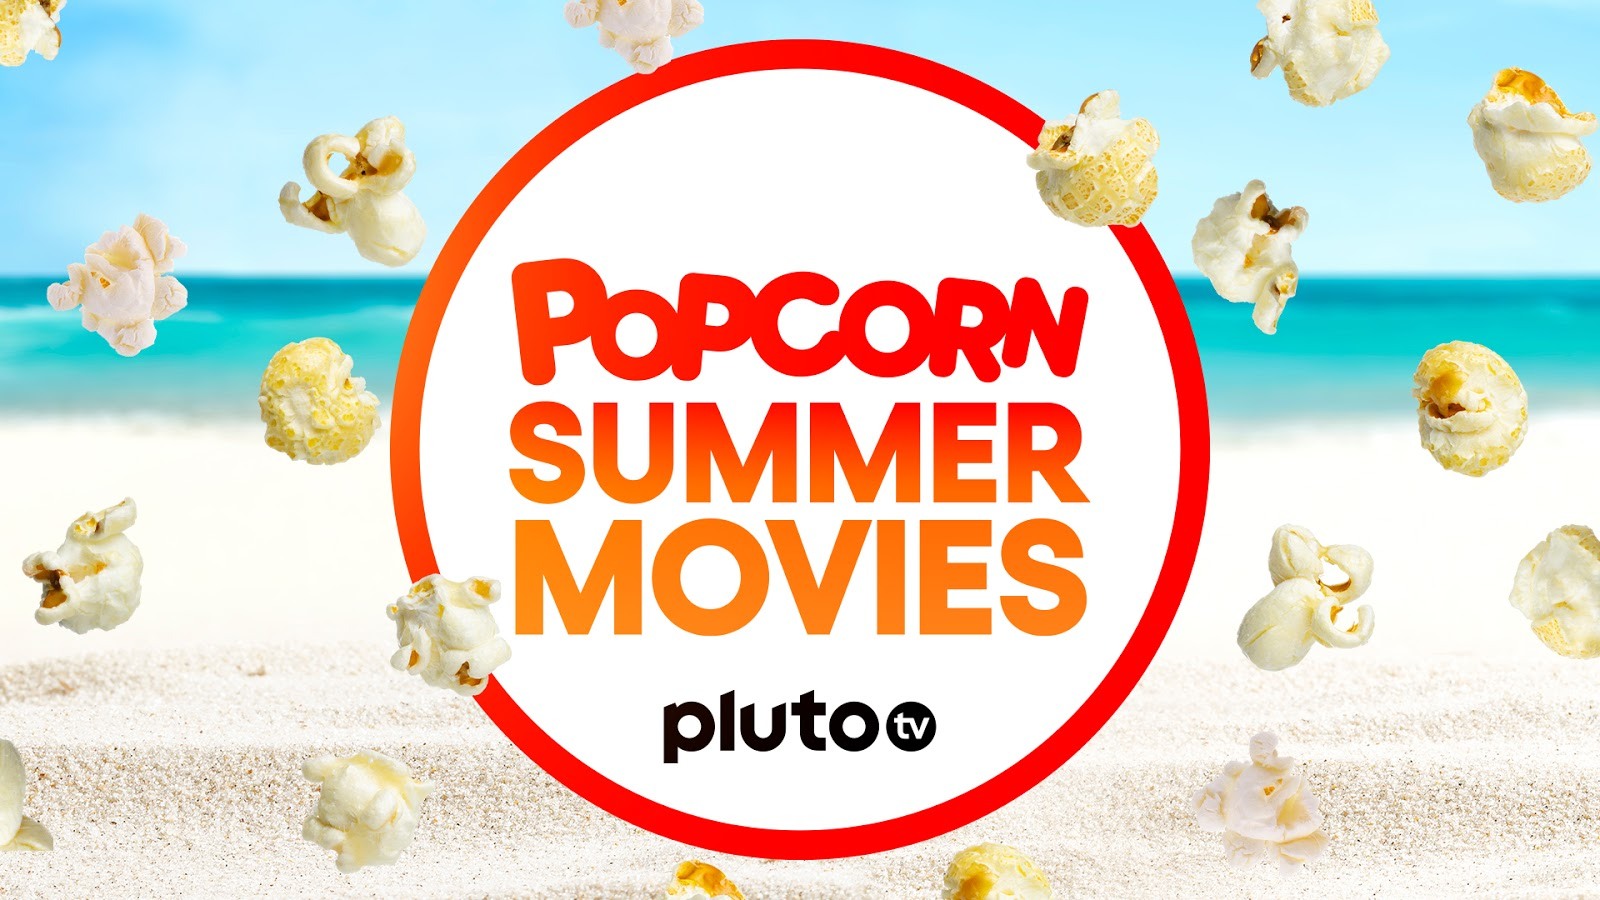 Pluto TV is Adding New Free Movies in June, July & August